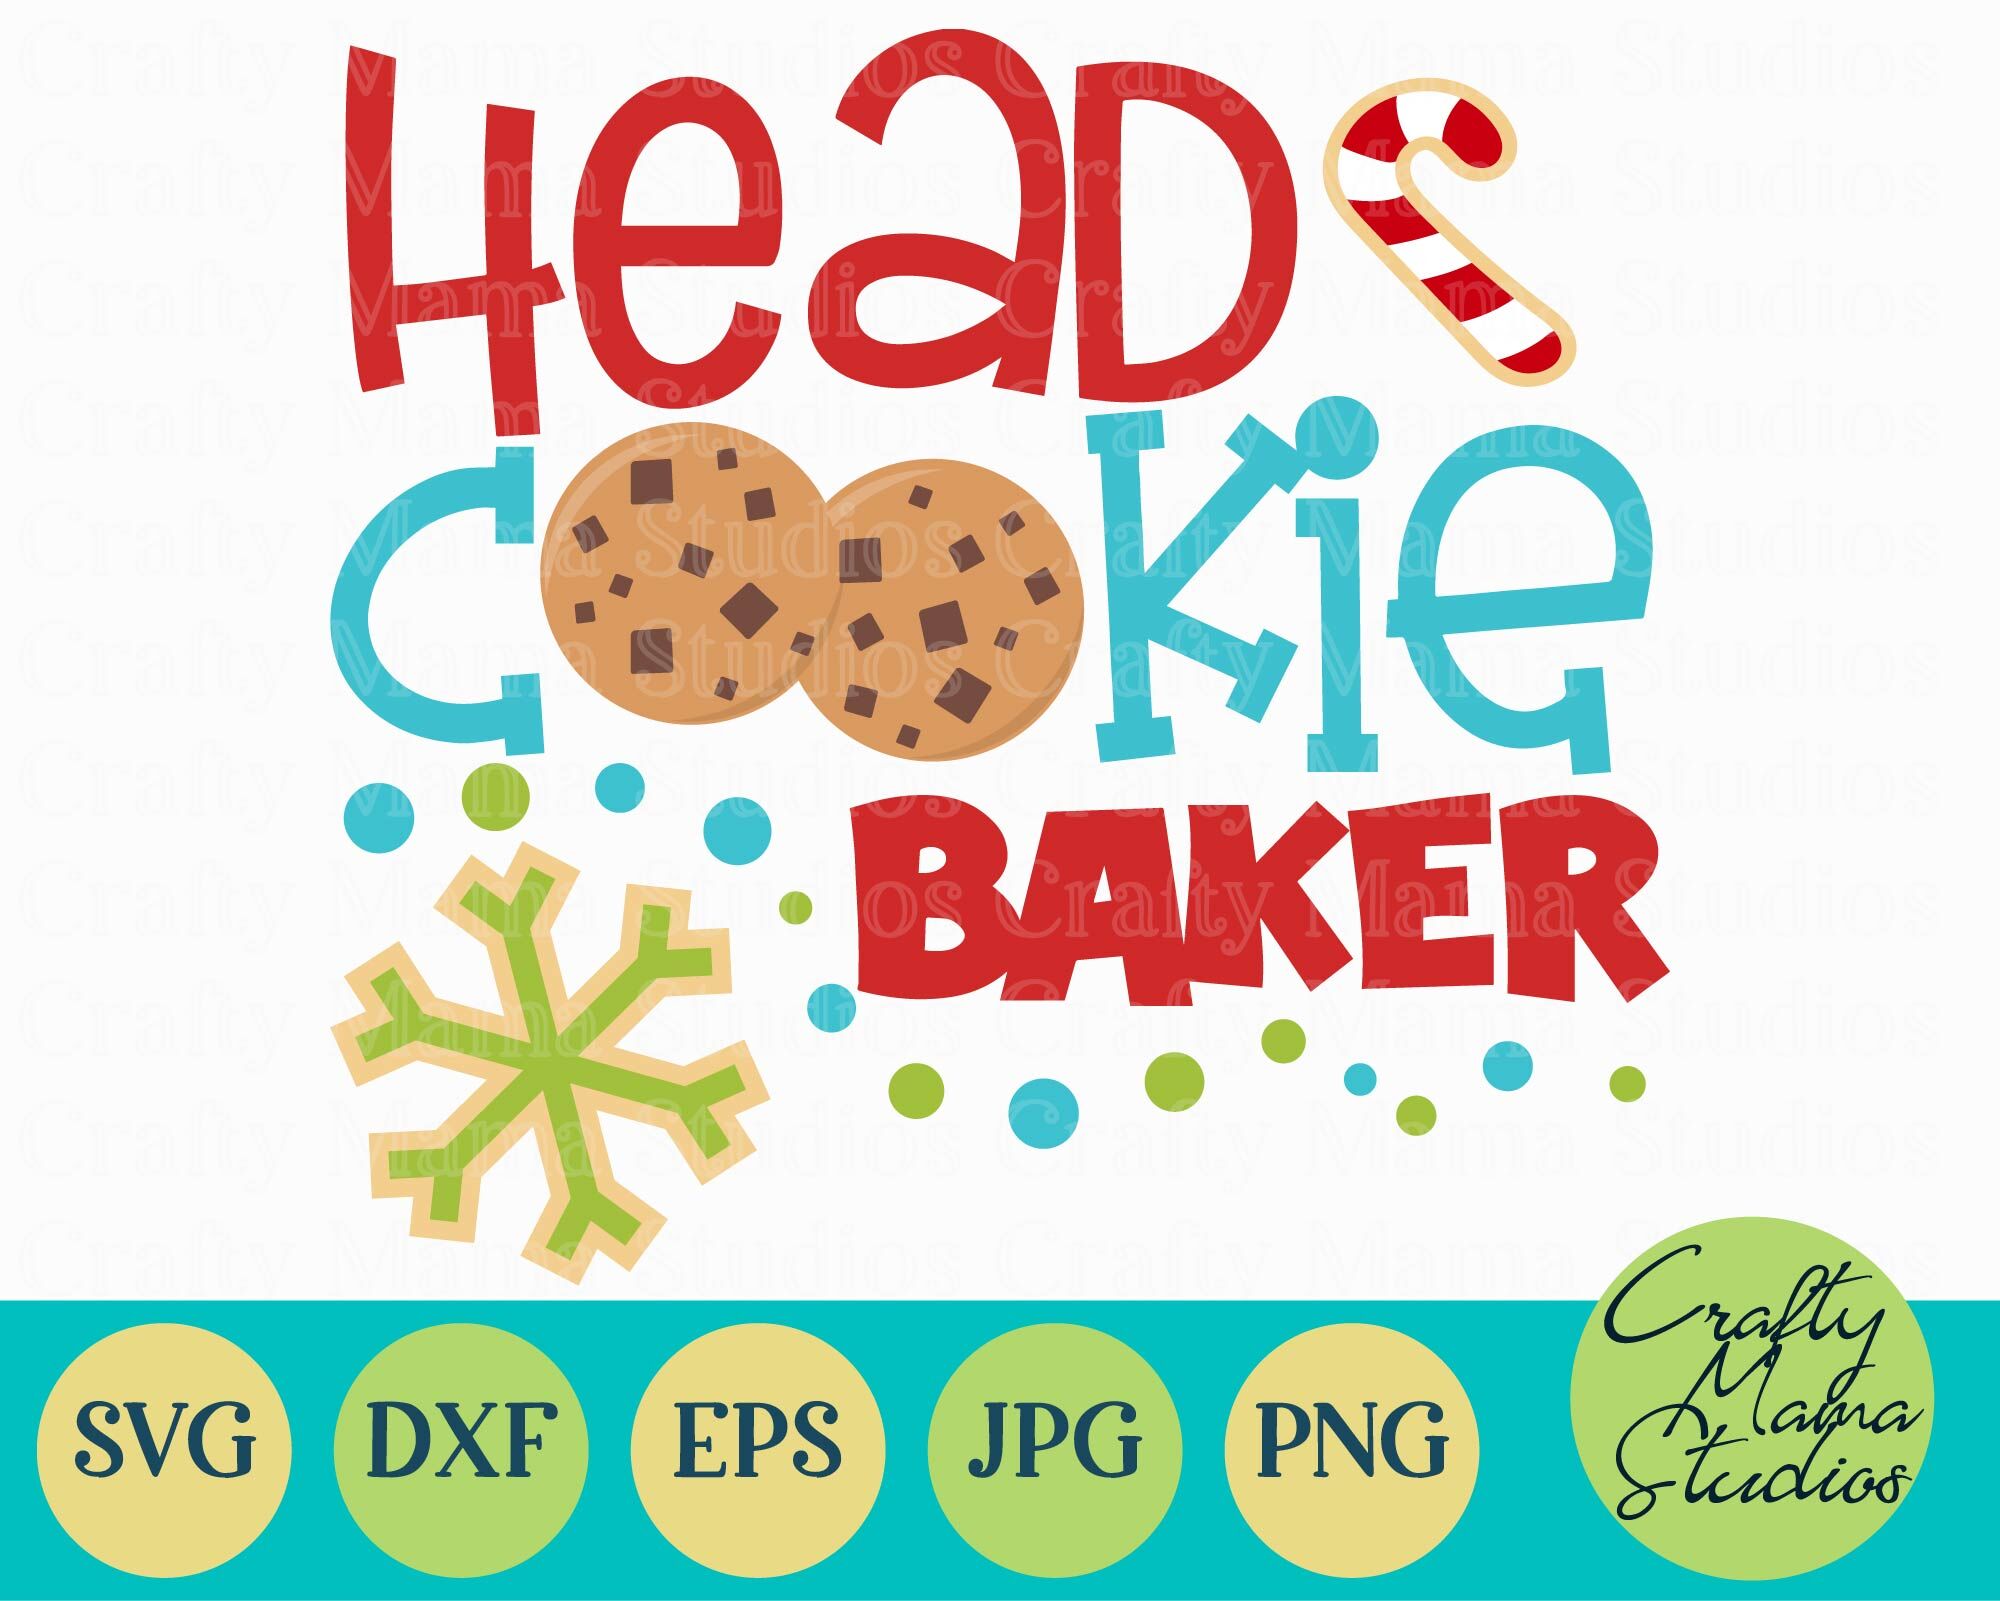 Christmas Svg Head Cookie Baker Official Cookie Tester By Crafty Mama Studios Thehungryjpeg Com